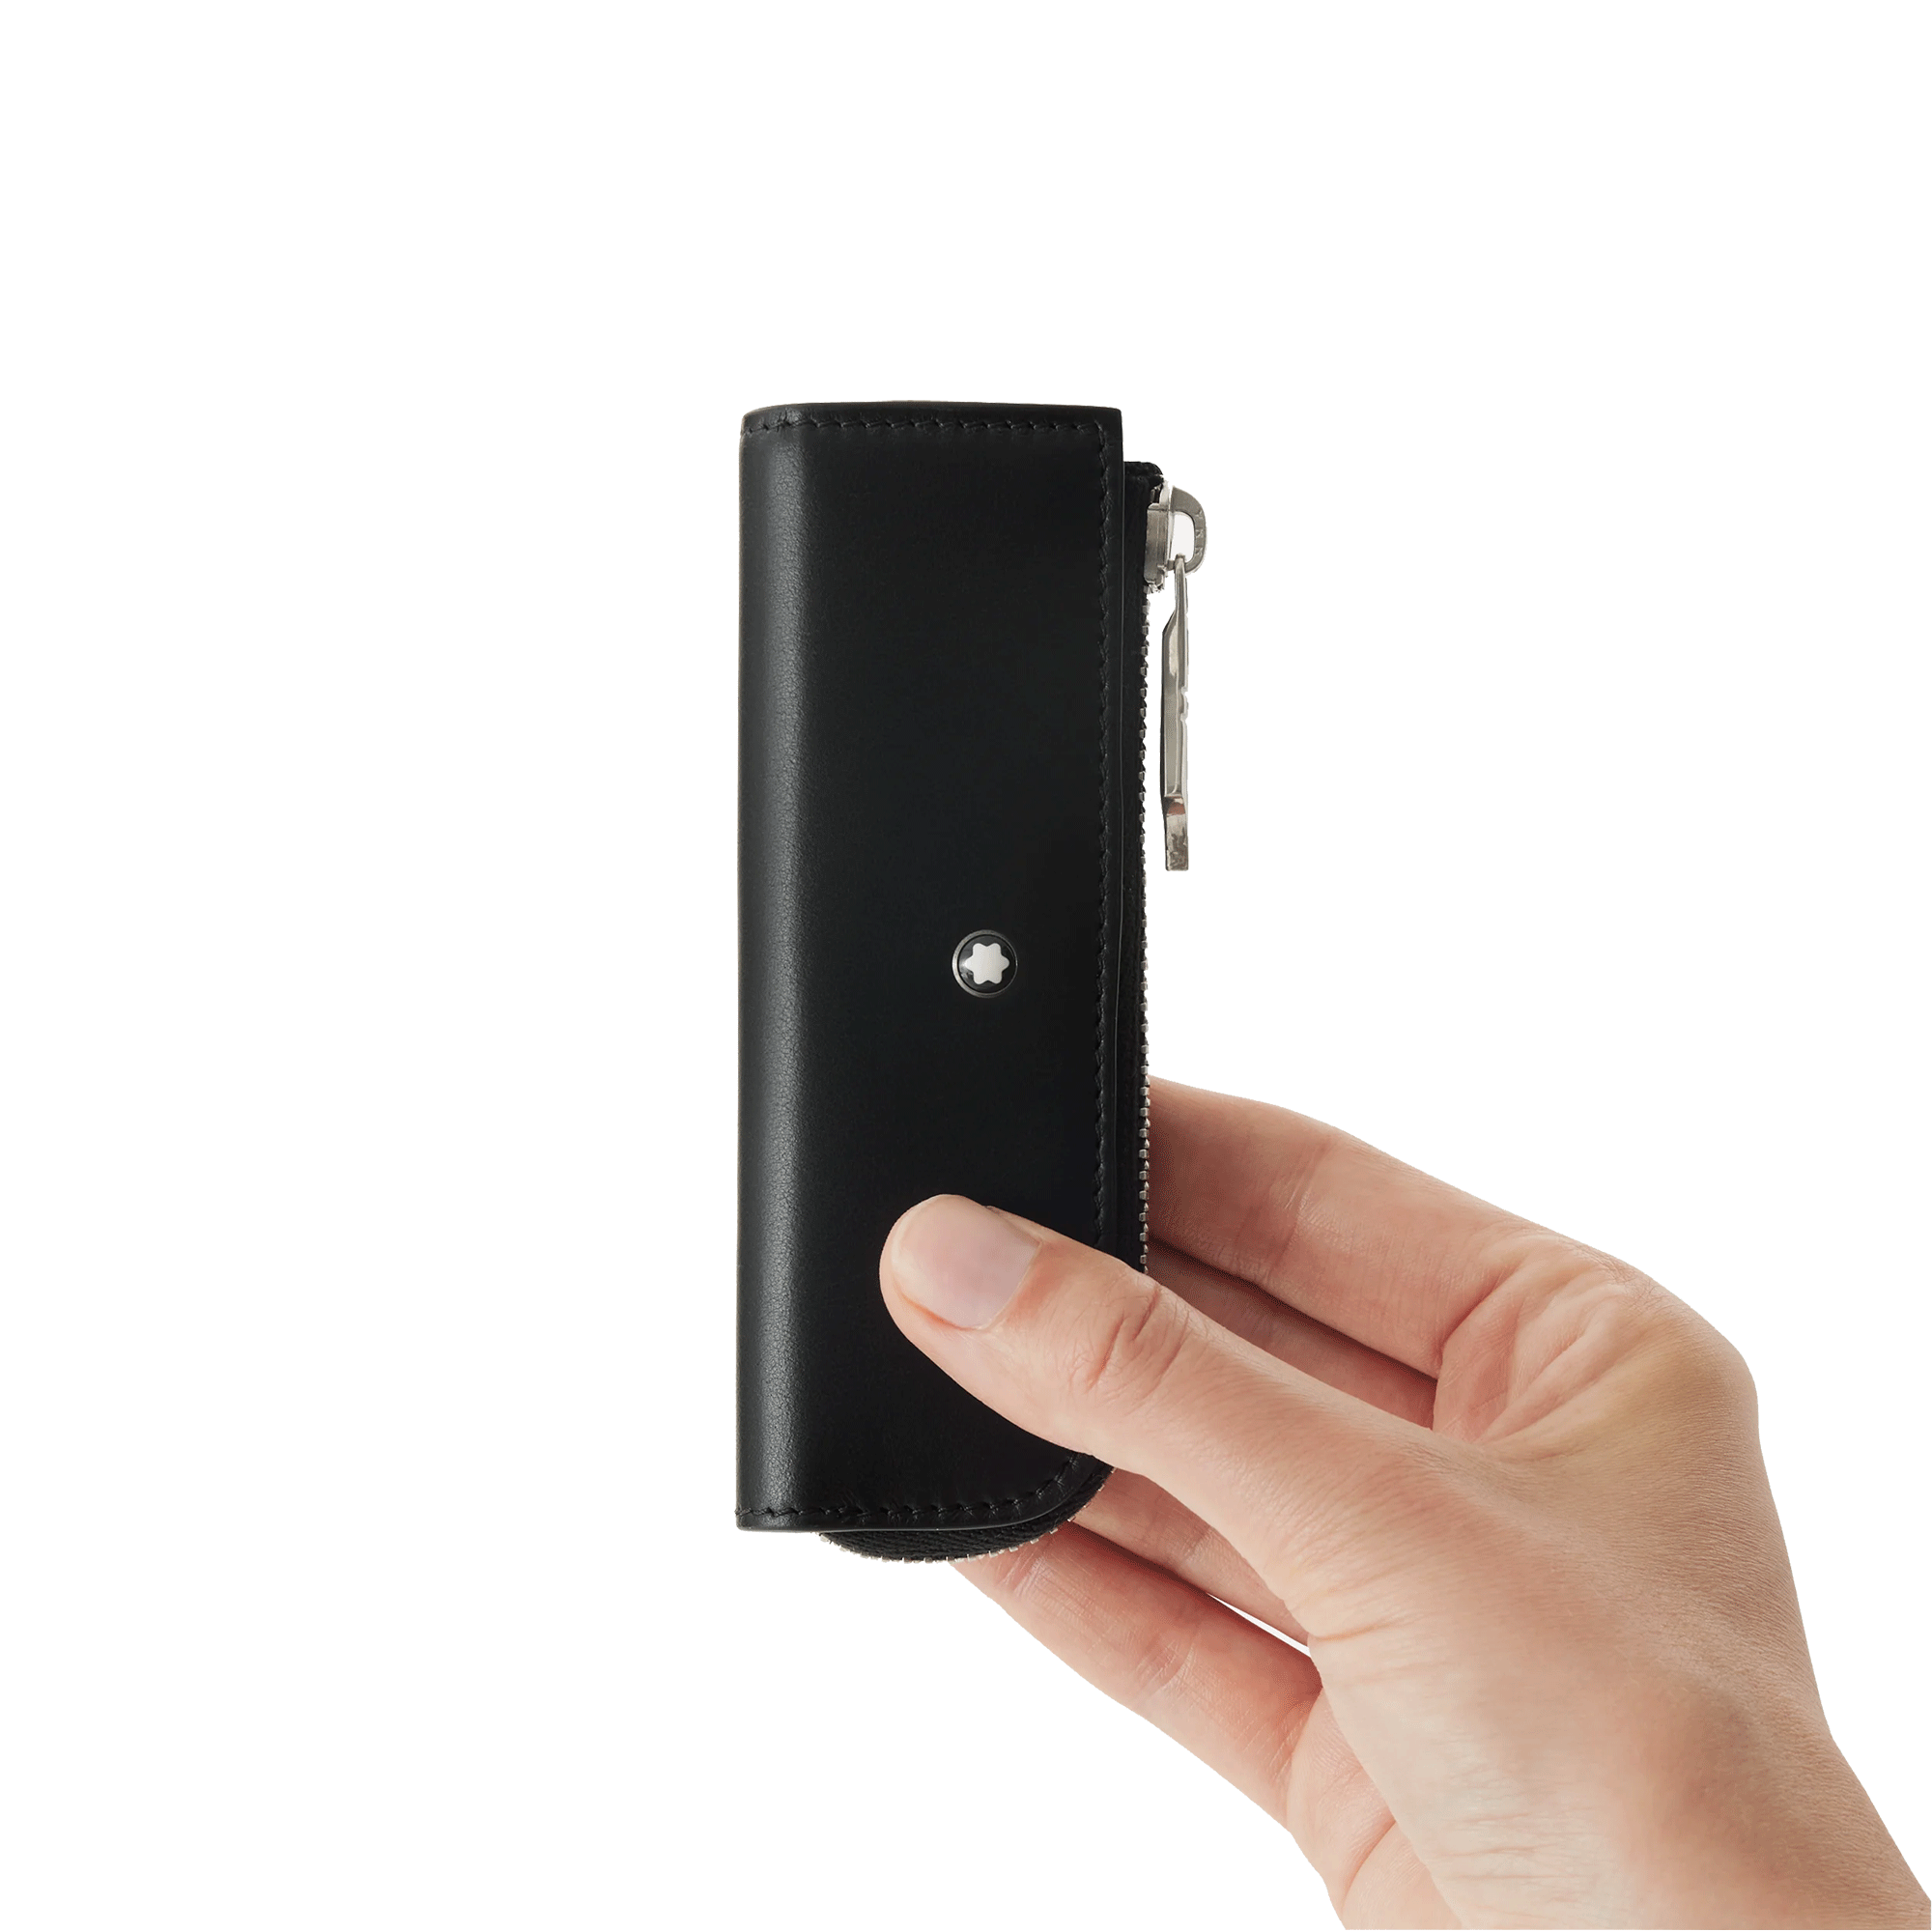 Meisterstuck Selection 1-Pen Pouch in Black Leather